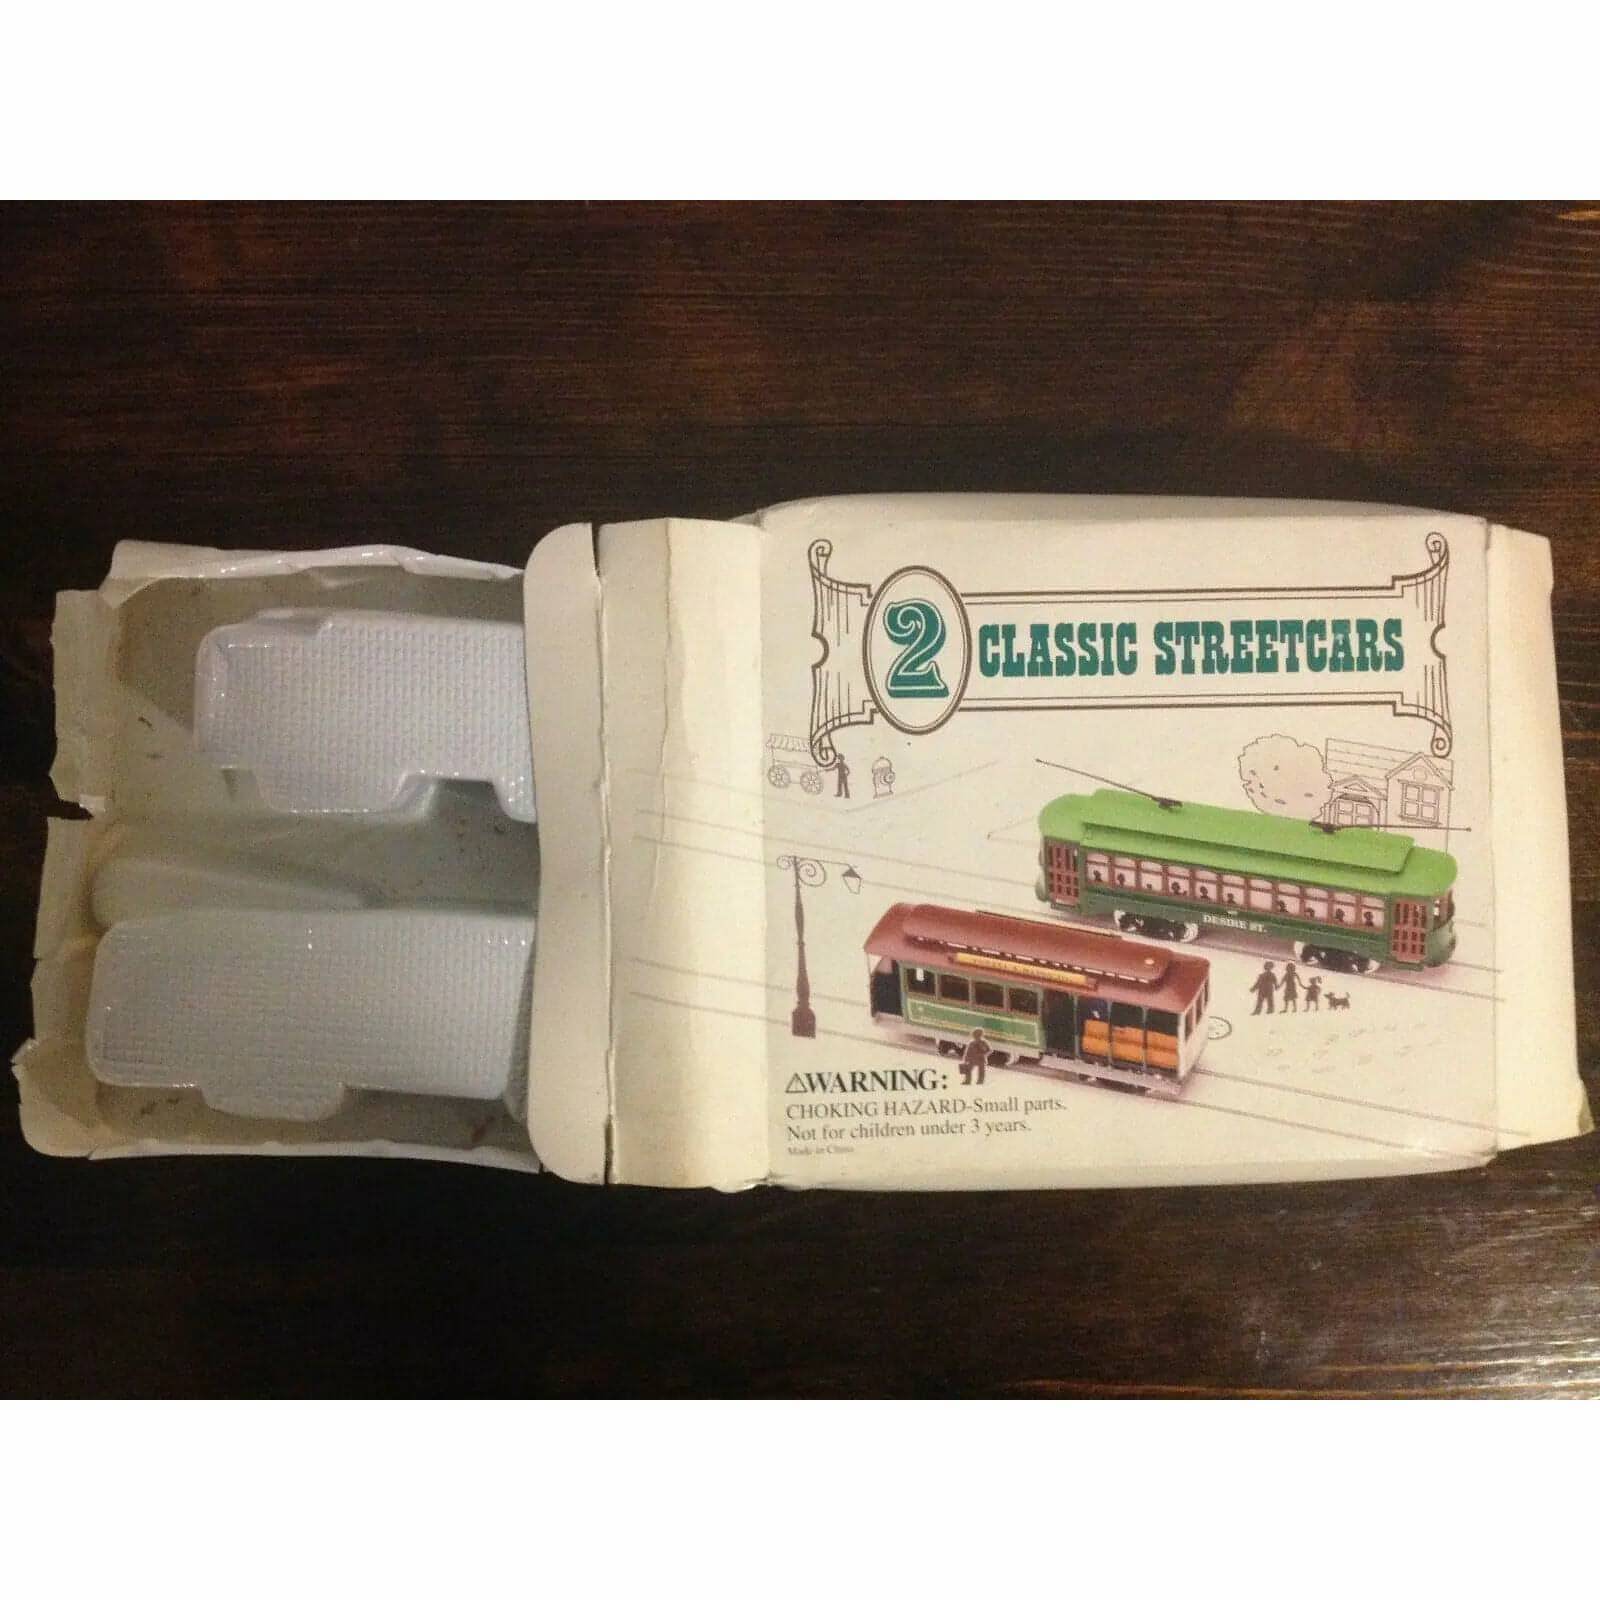 Two Classic Street Cars: HO Gauge [Toy Train Car] BooksCardsNBikes